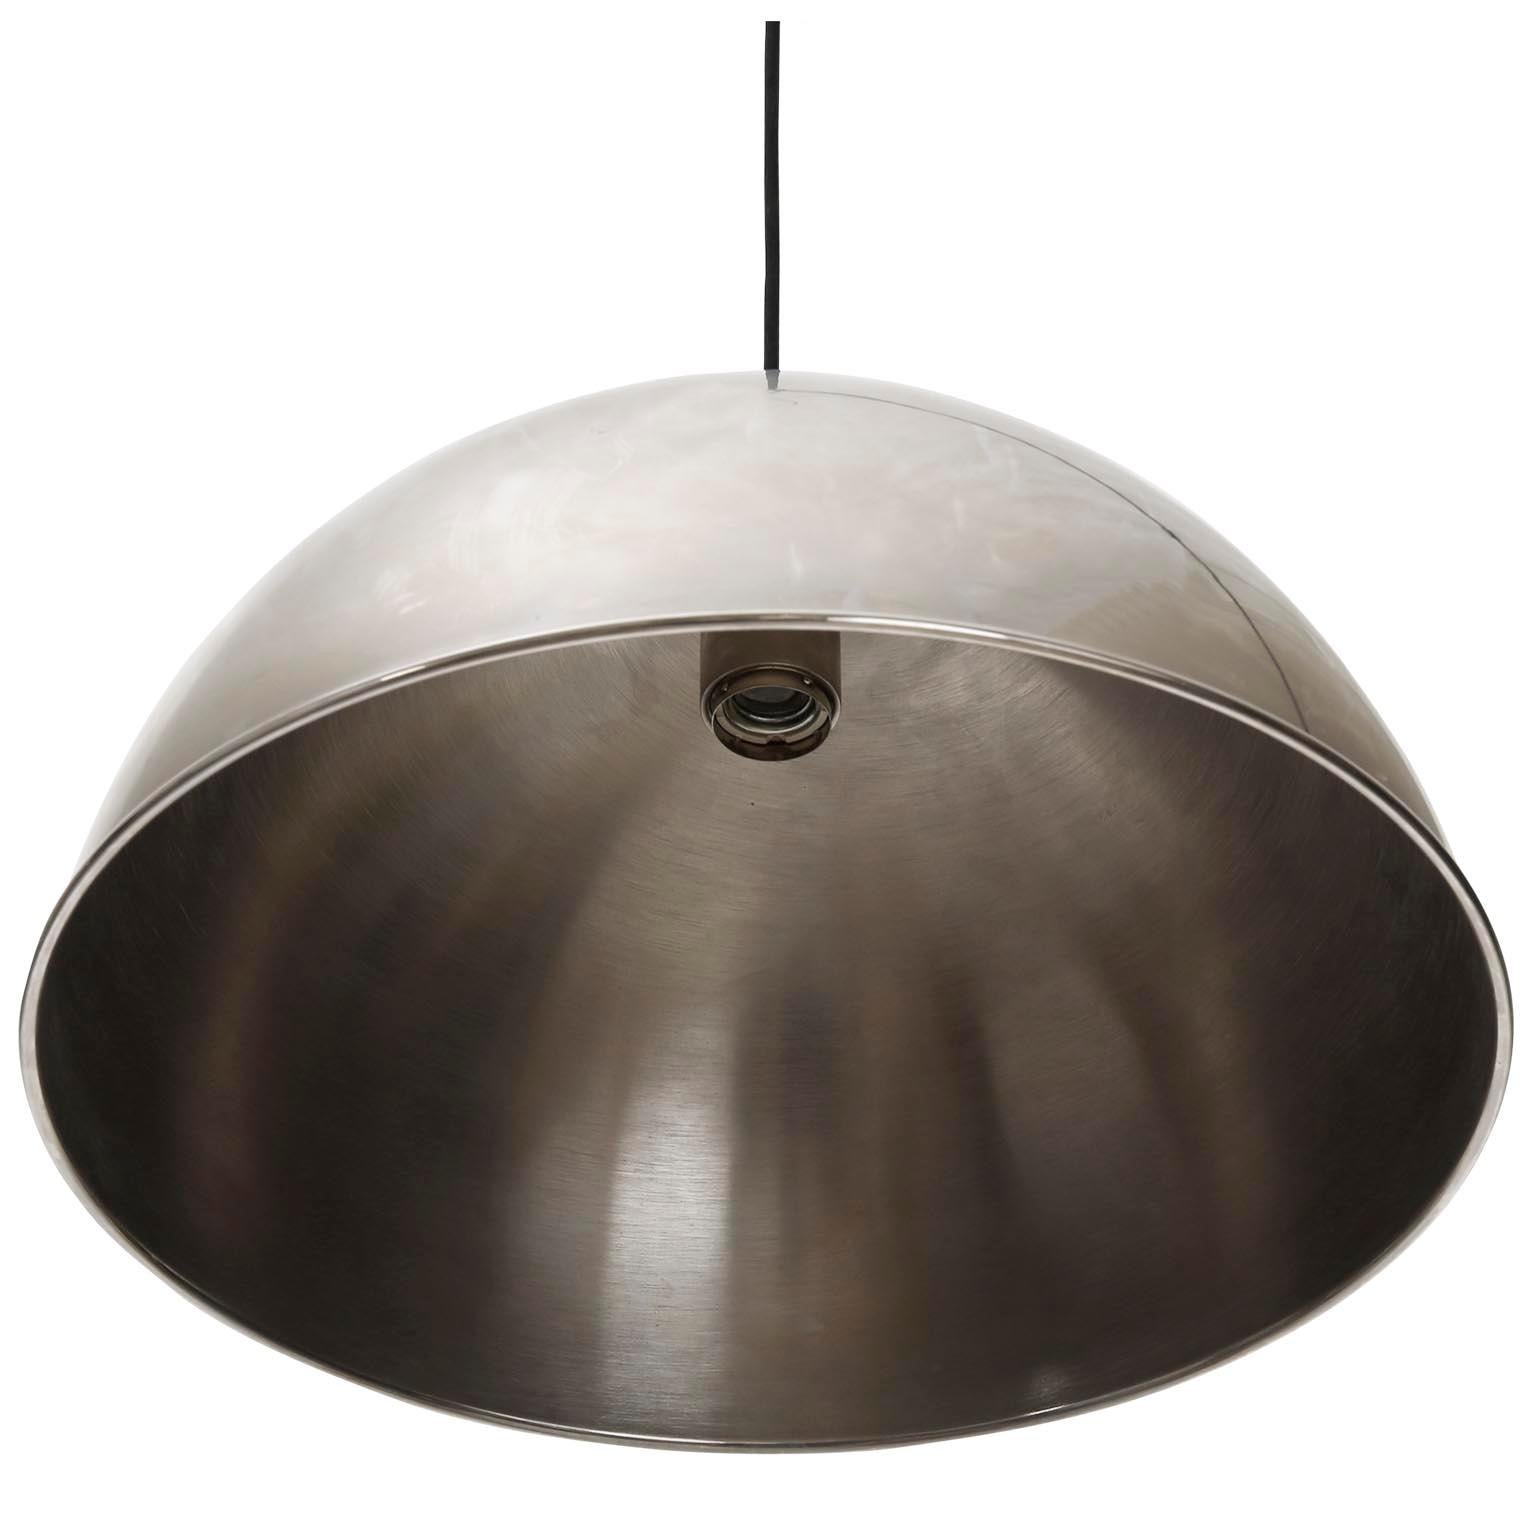 Florian Schulz Pendant Light Counterweight Counterbalance Patinated Nickel, 1970 In Good Condition For Sale In Hausmannstätten, AT